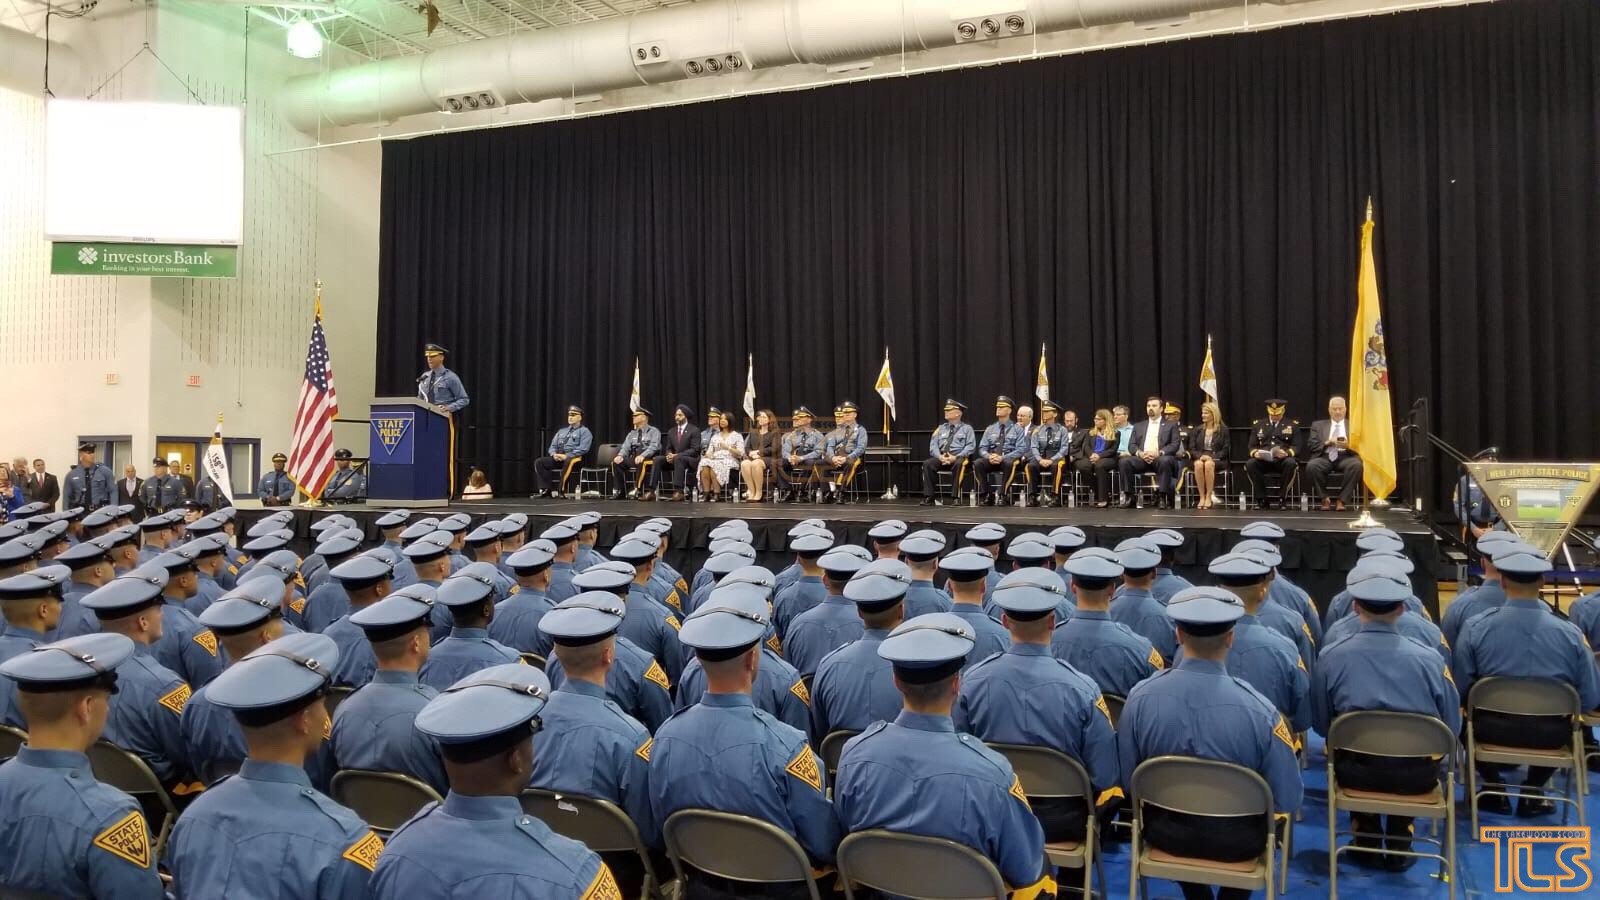 PHOTOS More from the NJSP graduation The Lakewood Scoop